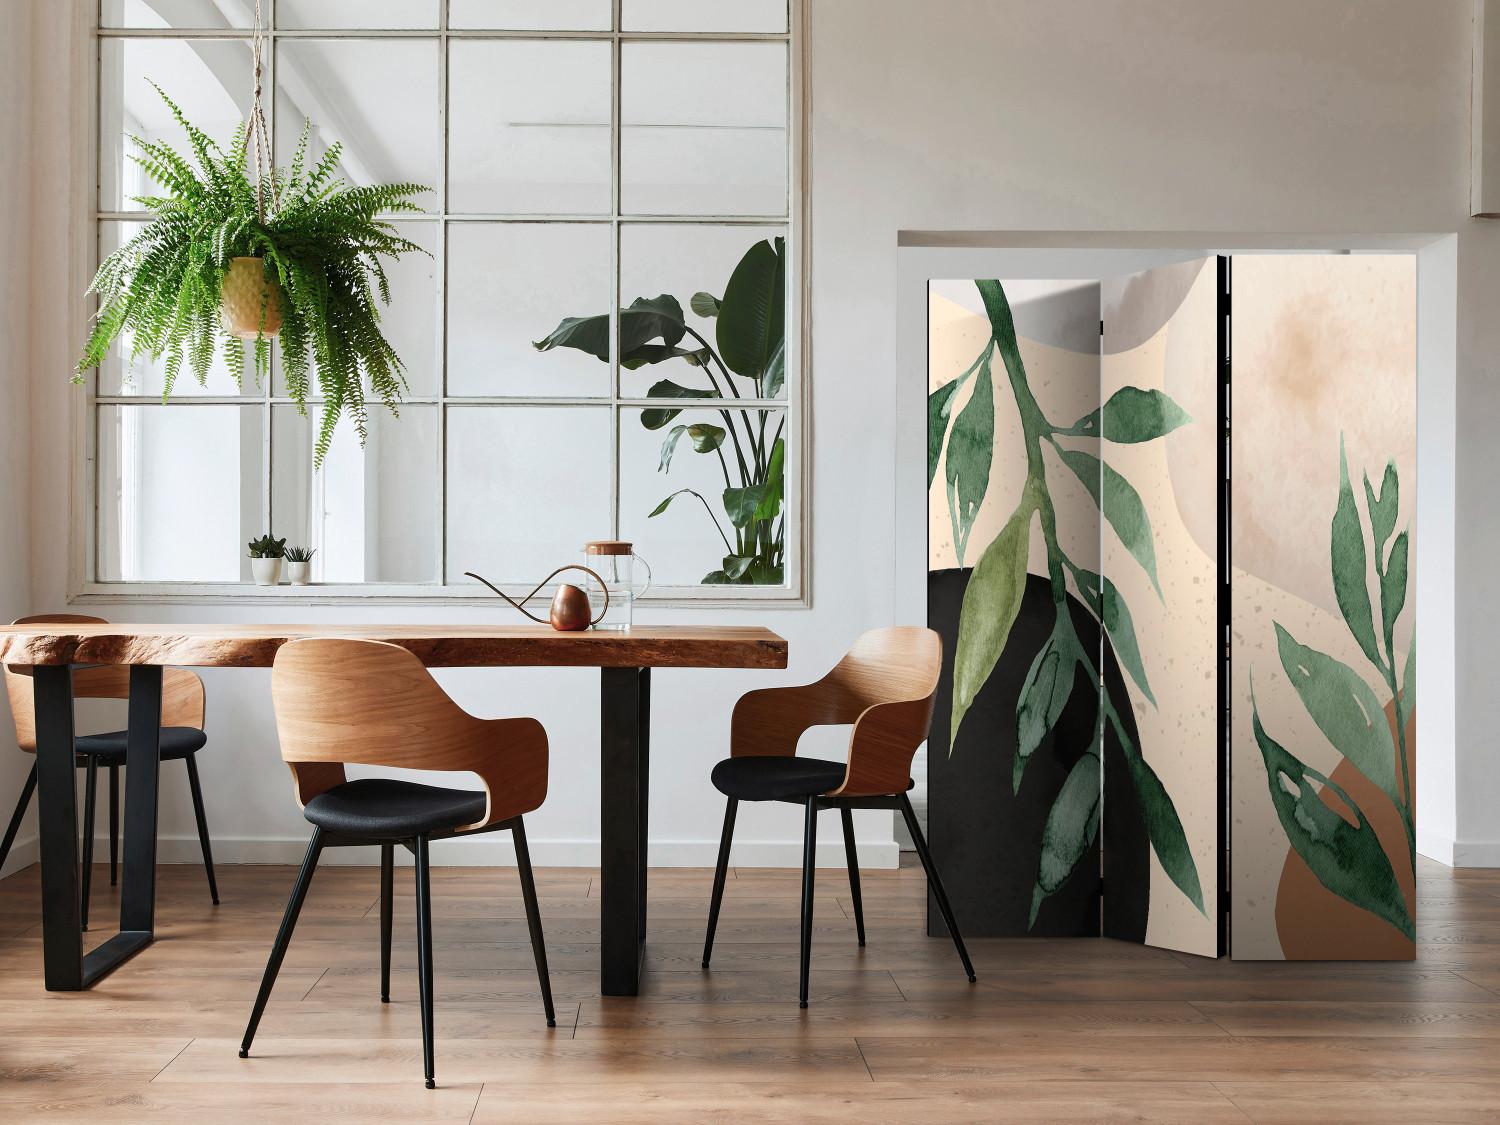 Room Divider Harmony of Nature (3-piece) - Green plants in scandiboho style